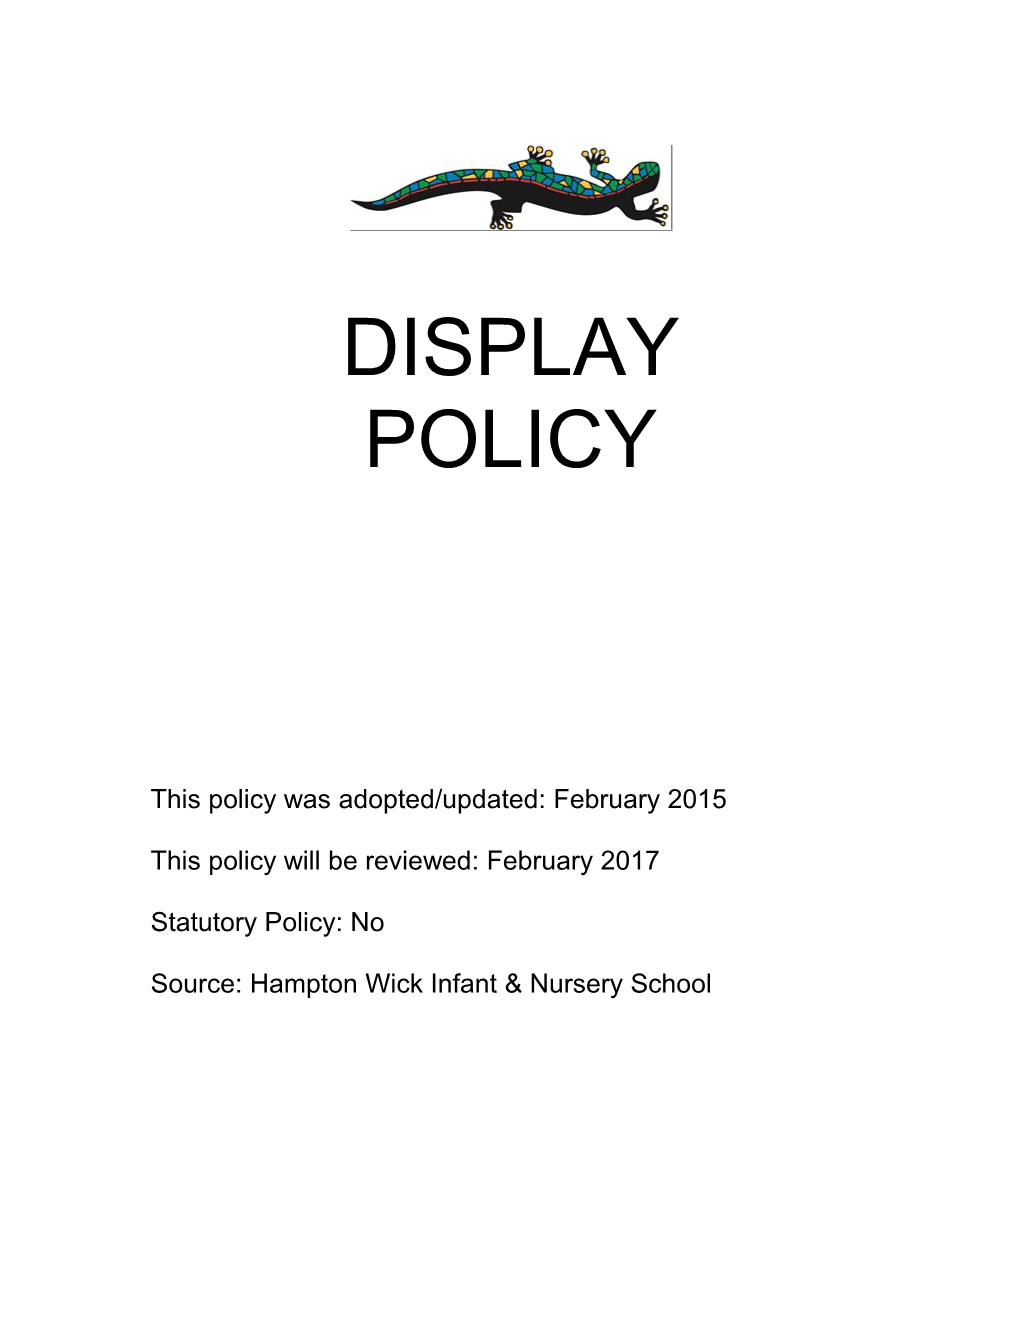 This Policy Was Adopted/Updated: February 2015